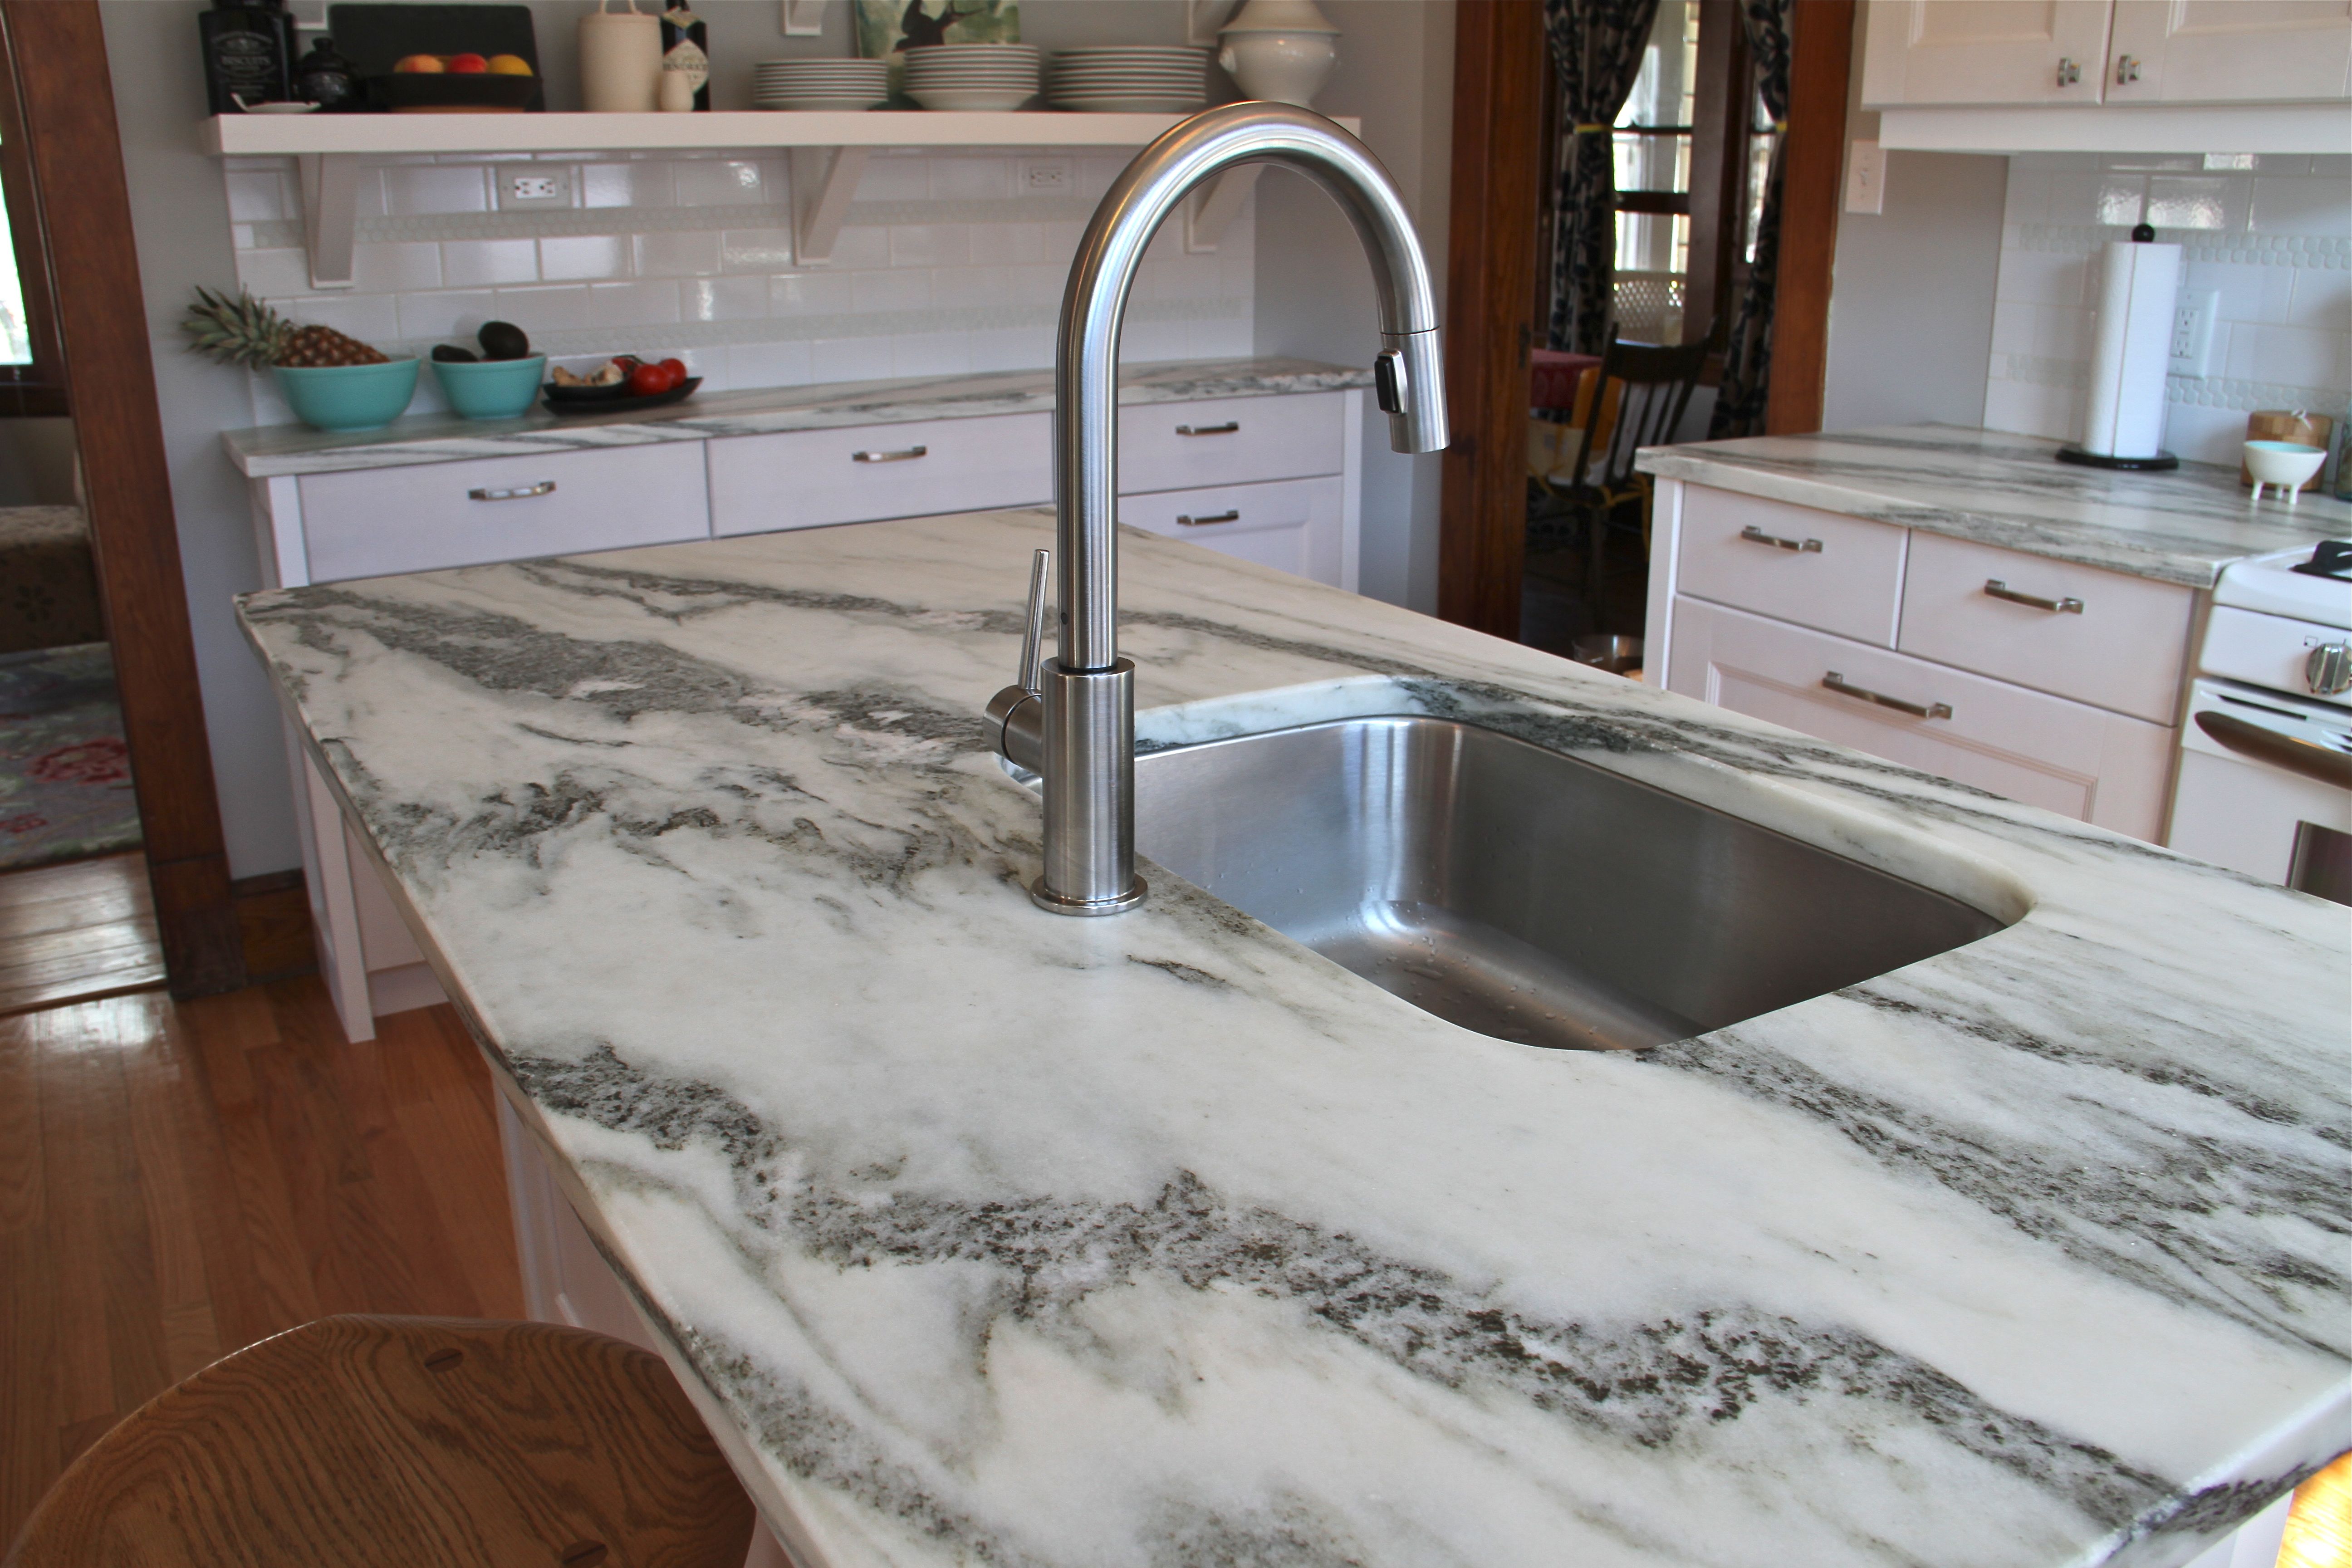 AFTER: While the kitchen isn't huge (approx 12'x12'), the island is still the hub of the space, housing the sink, dishwasher, seating and a lovely piece of Vermont Danby stone (which is a locally quarried marble from, you guessed right, Danby, VT).